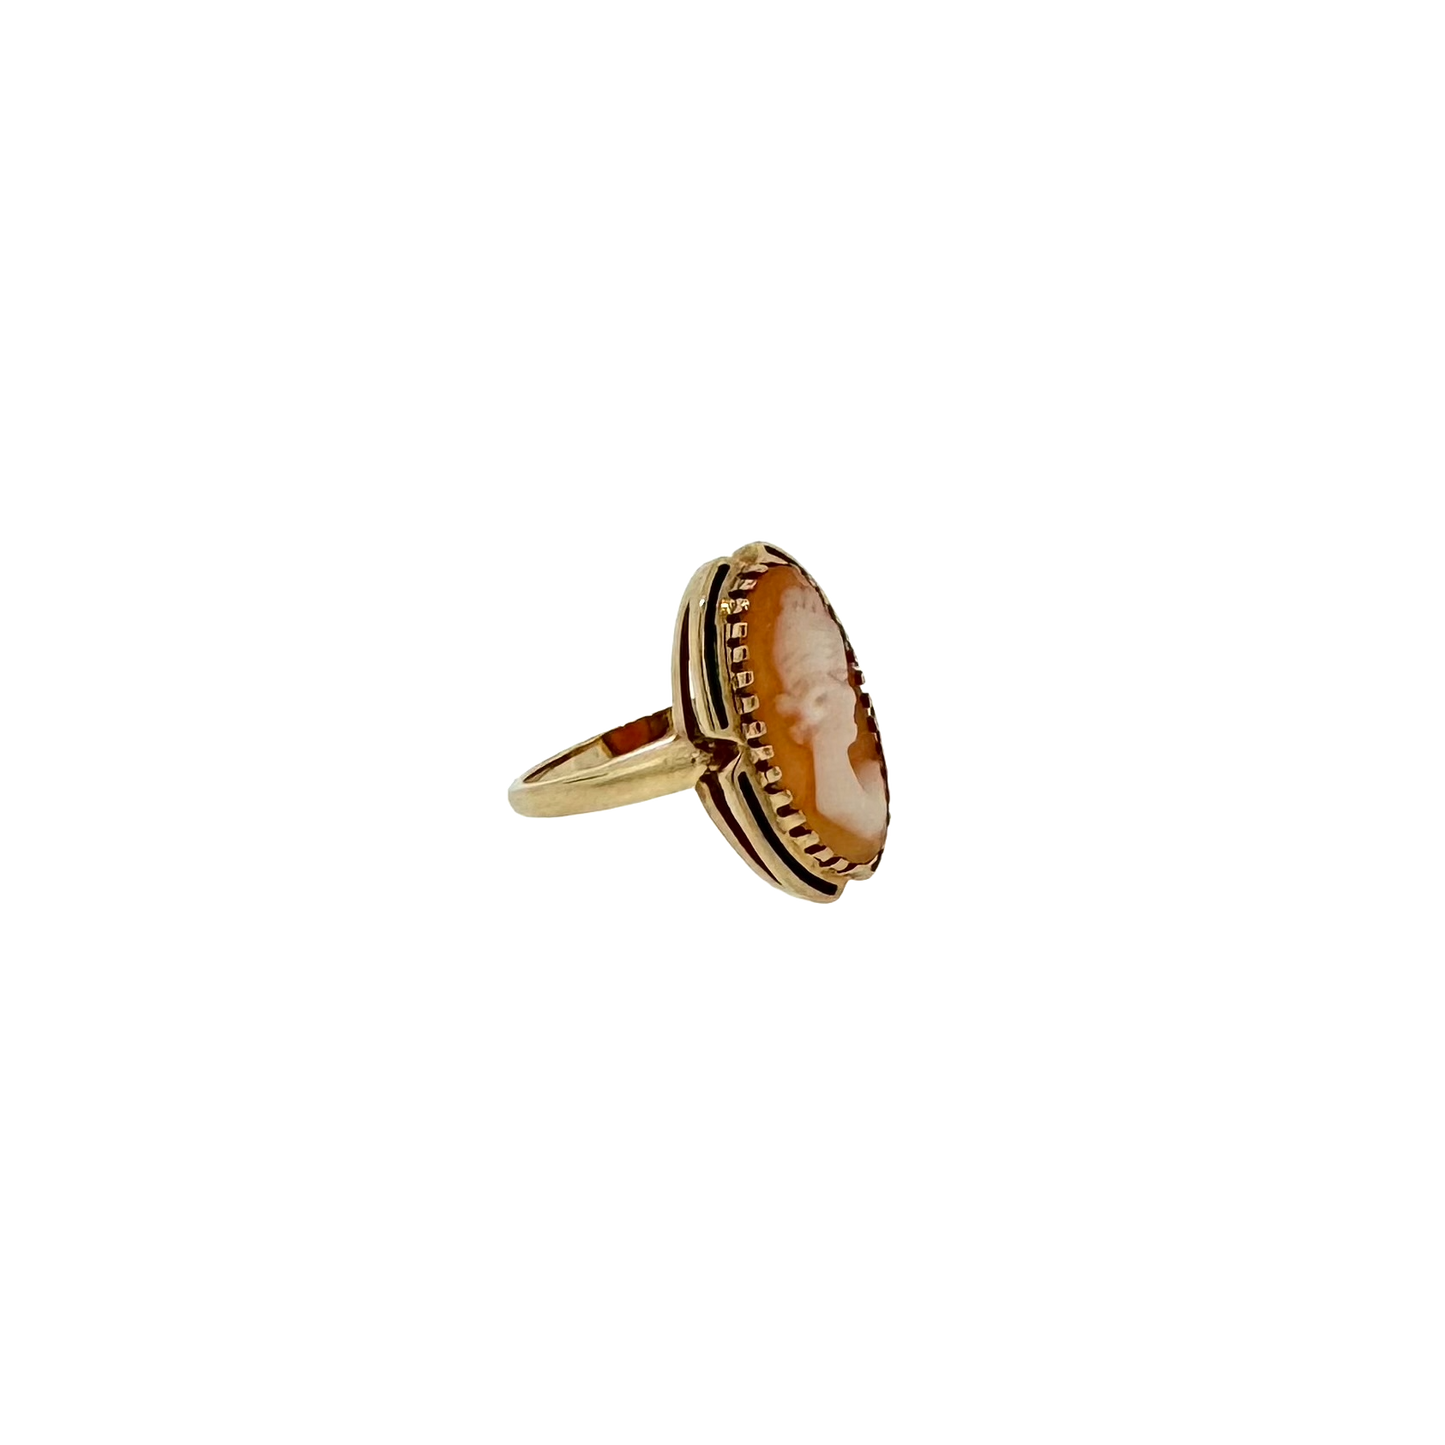 Estate 10k + Elongated Oval Shell Cameo Ring